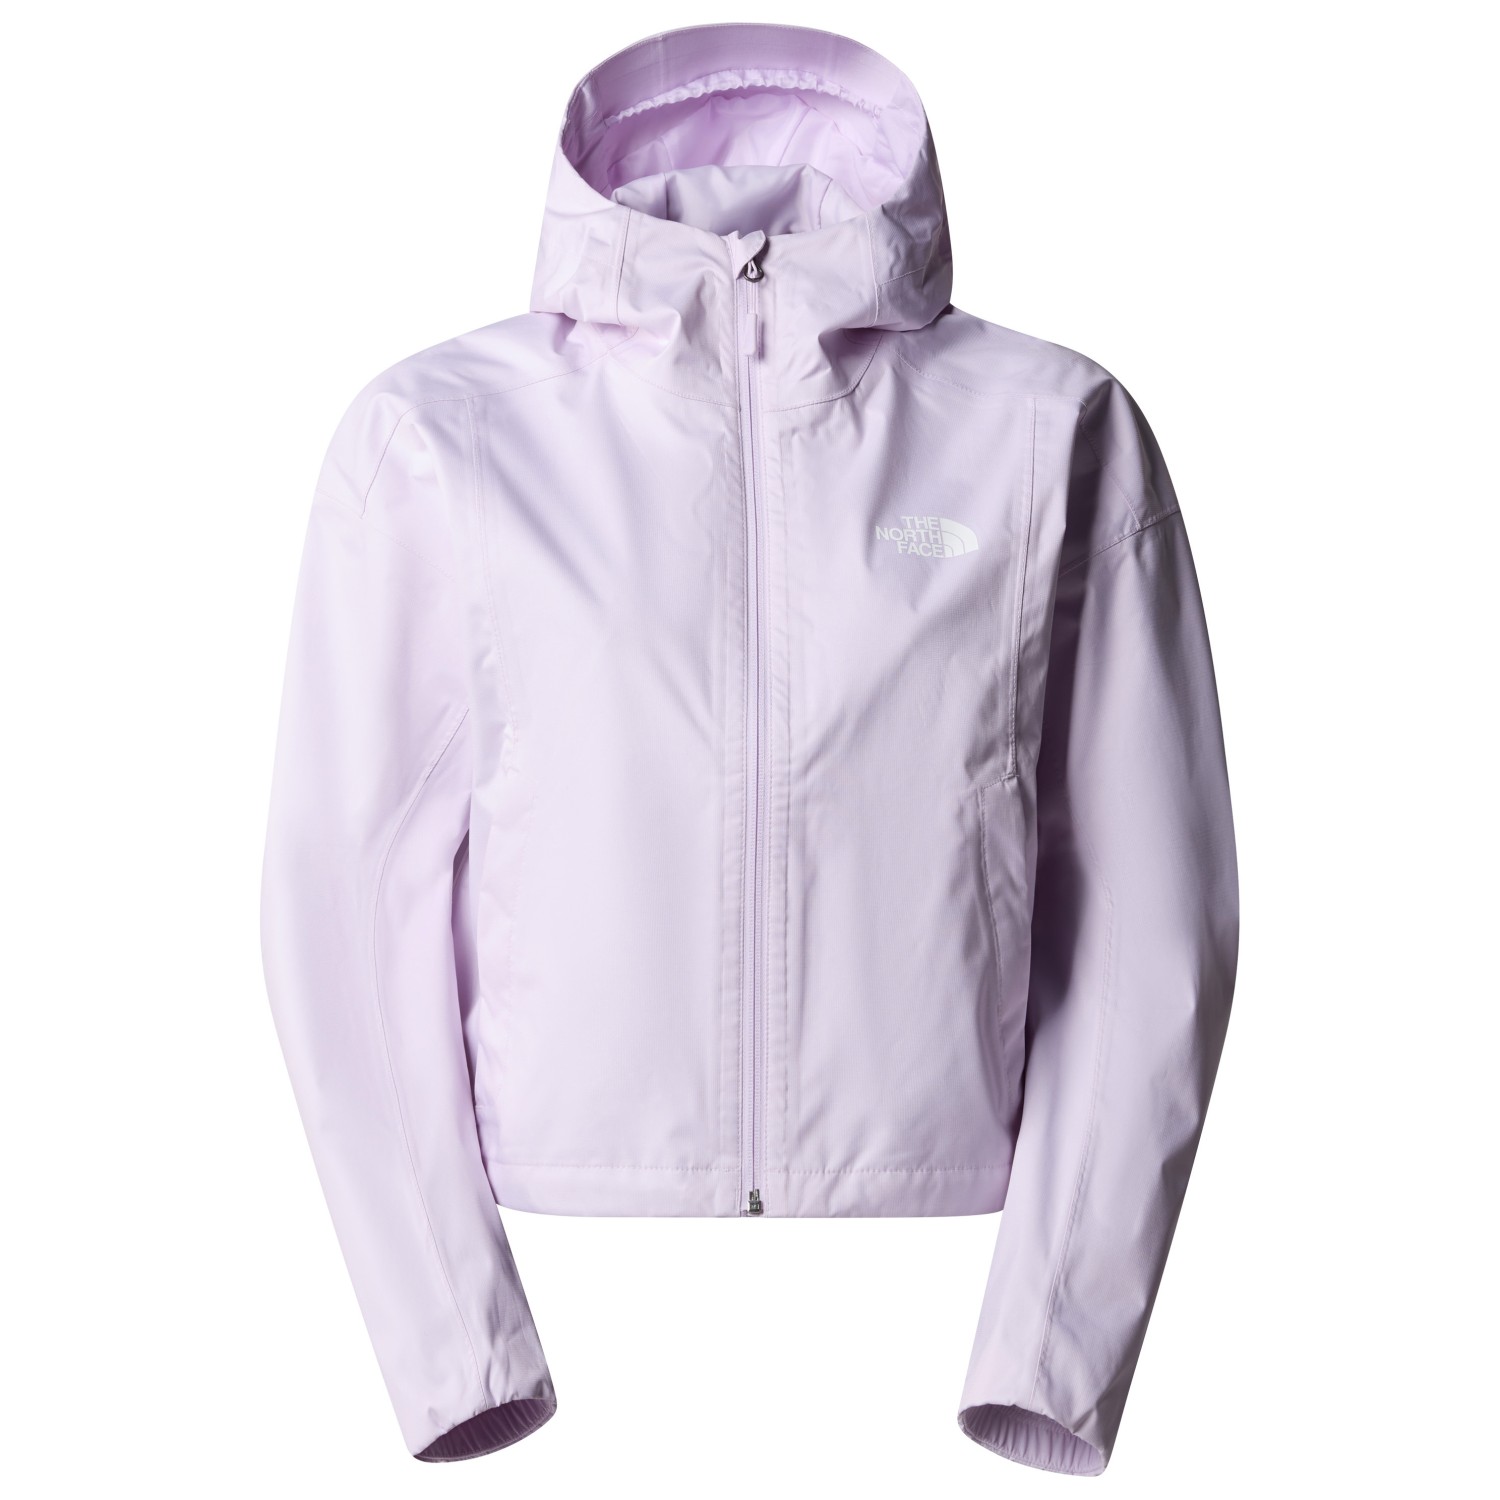 Дождевик The North Face Women's Cropped Quest, цвет Icy Lilac куртка the north face cropped quest черный